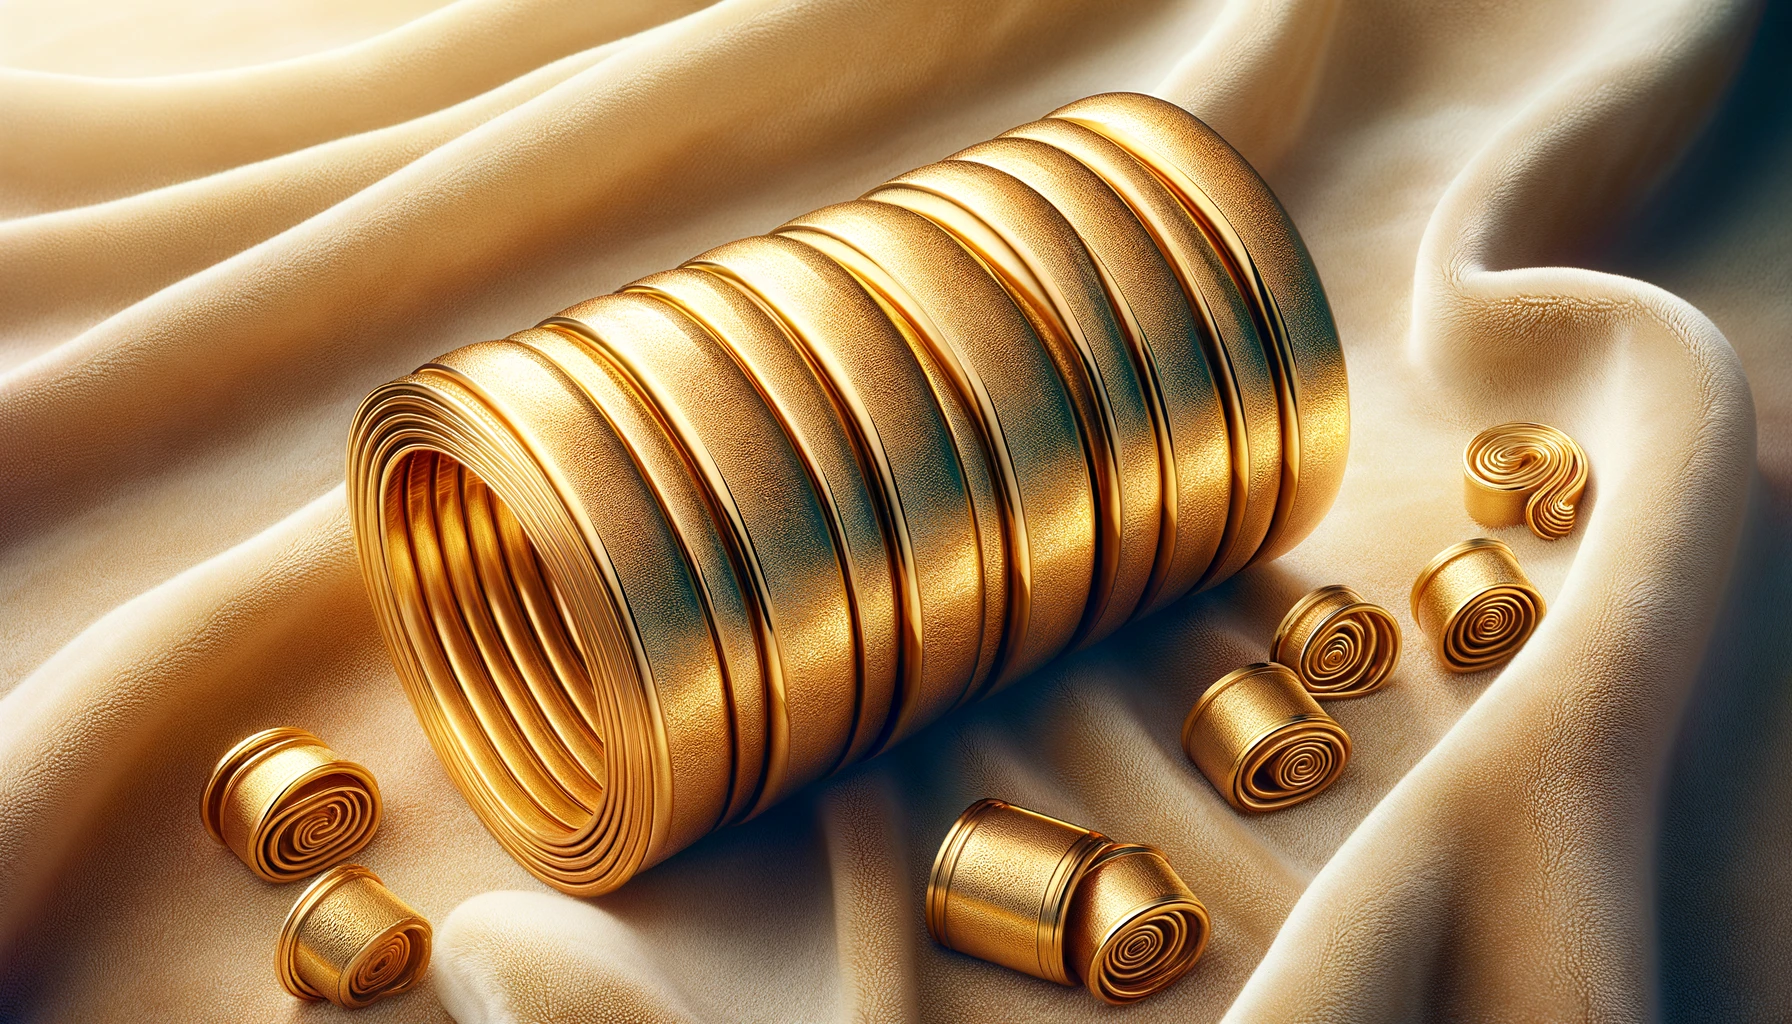 Panoramic view of rolled gold jewelry on a soft, velvety surface highlighting its luster and intricate craftsmanship